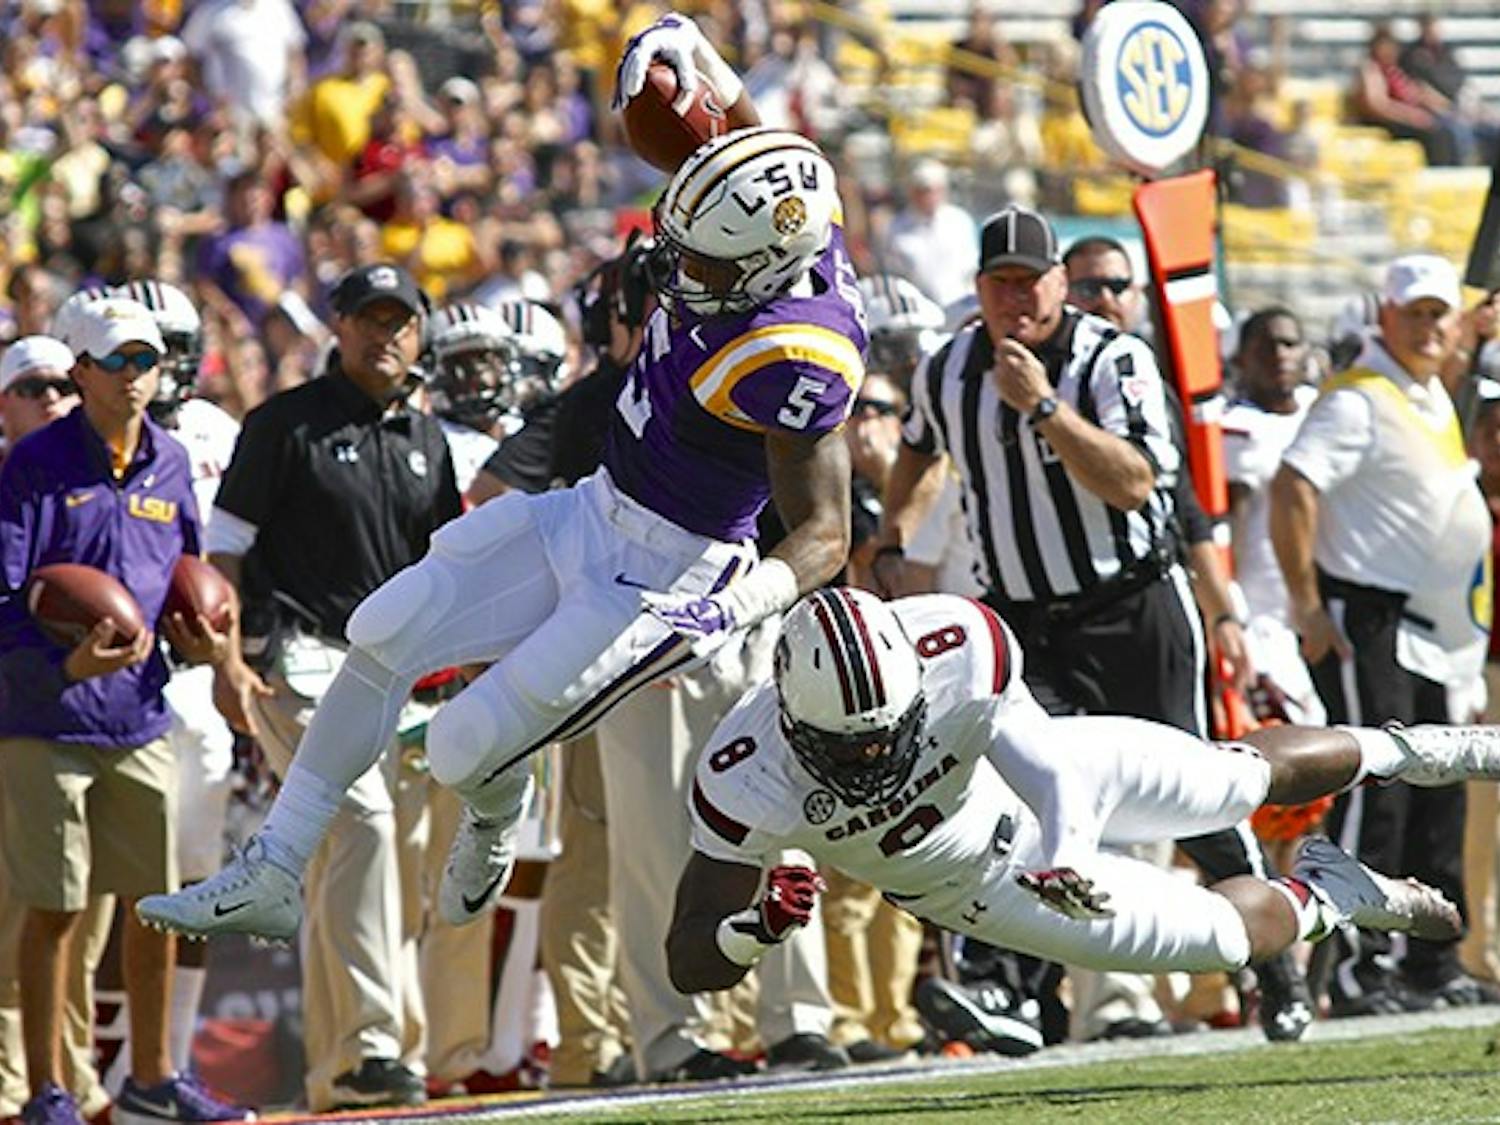 With the South Carolina floods, the USC vs LSU football game was moved to Baton Rouge. It was considered a home for the Gamecocks with a score of 45 LSU, and 24 USC. 